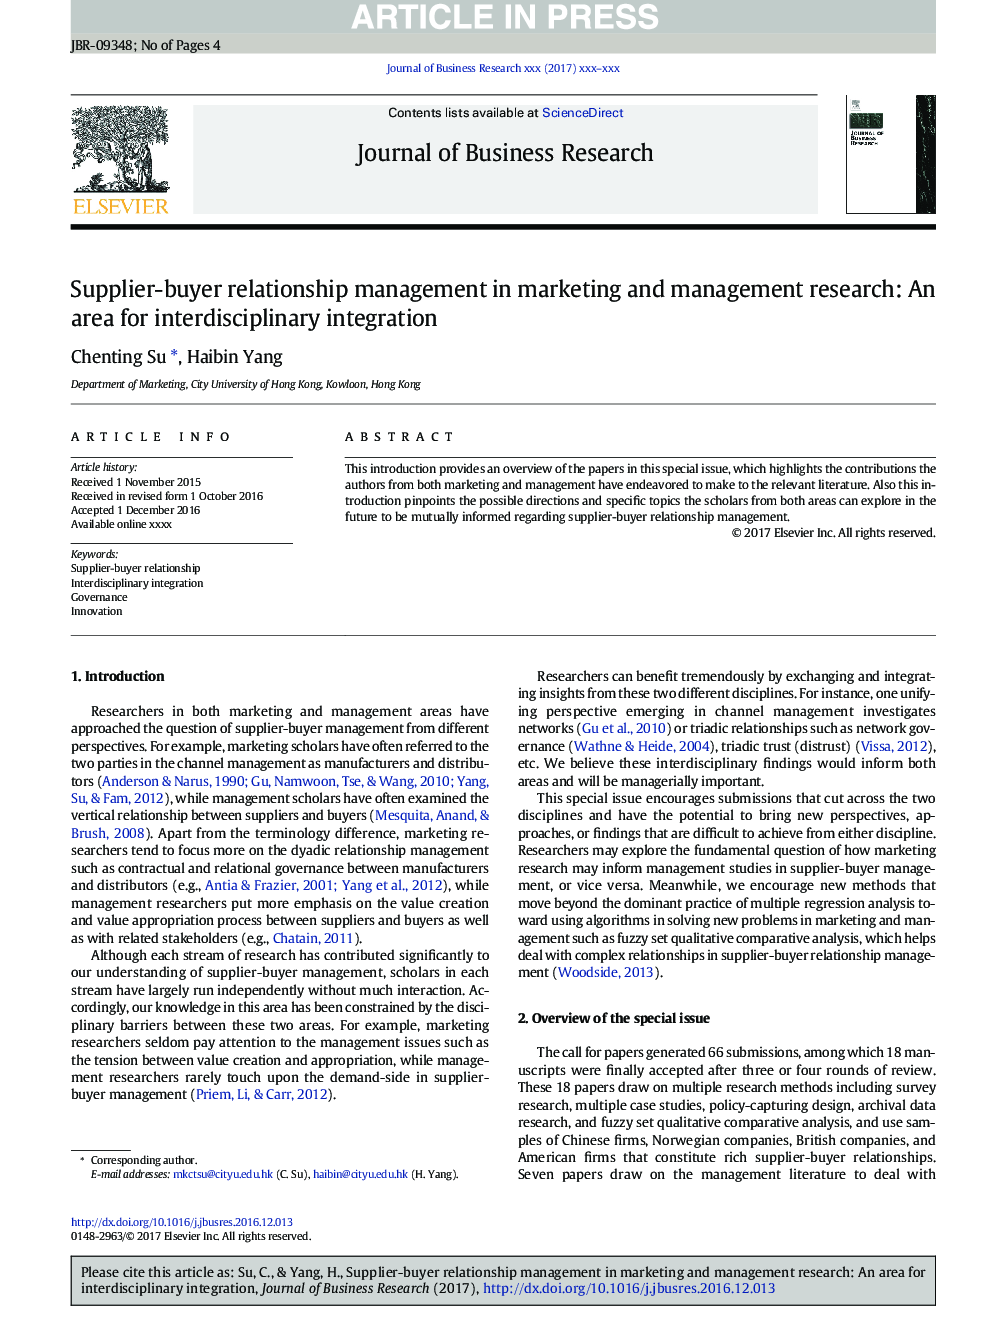 Supplier-buyer relationship management in marketing and management research: An area for interdisciplinary integration